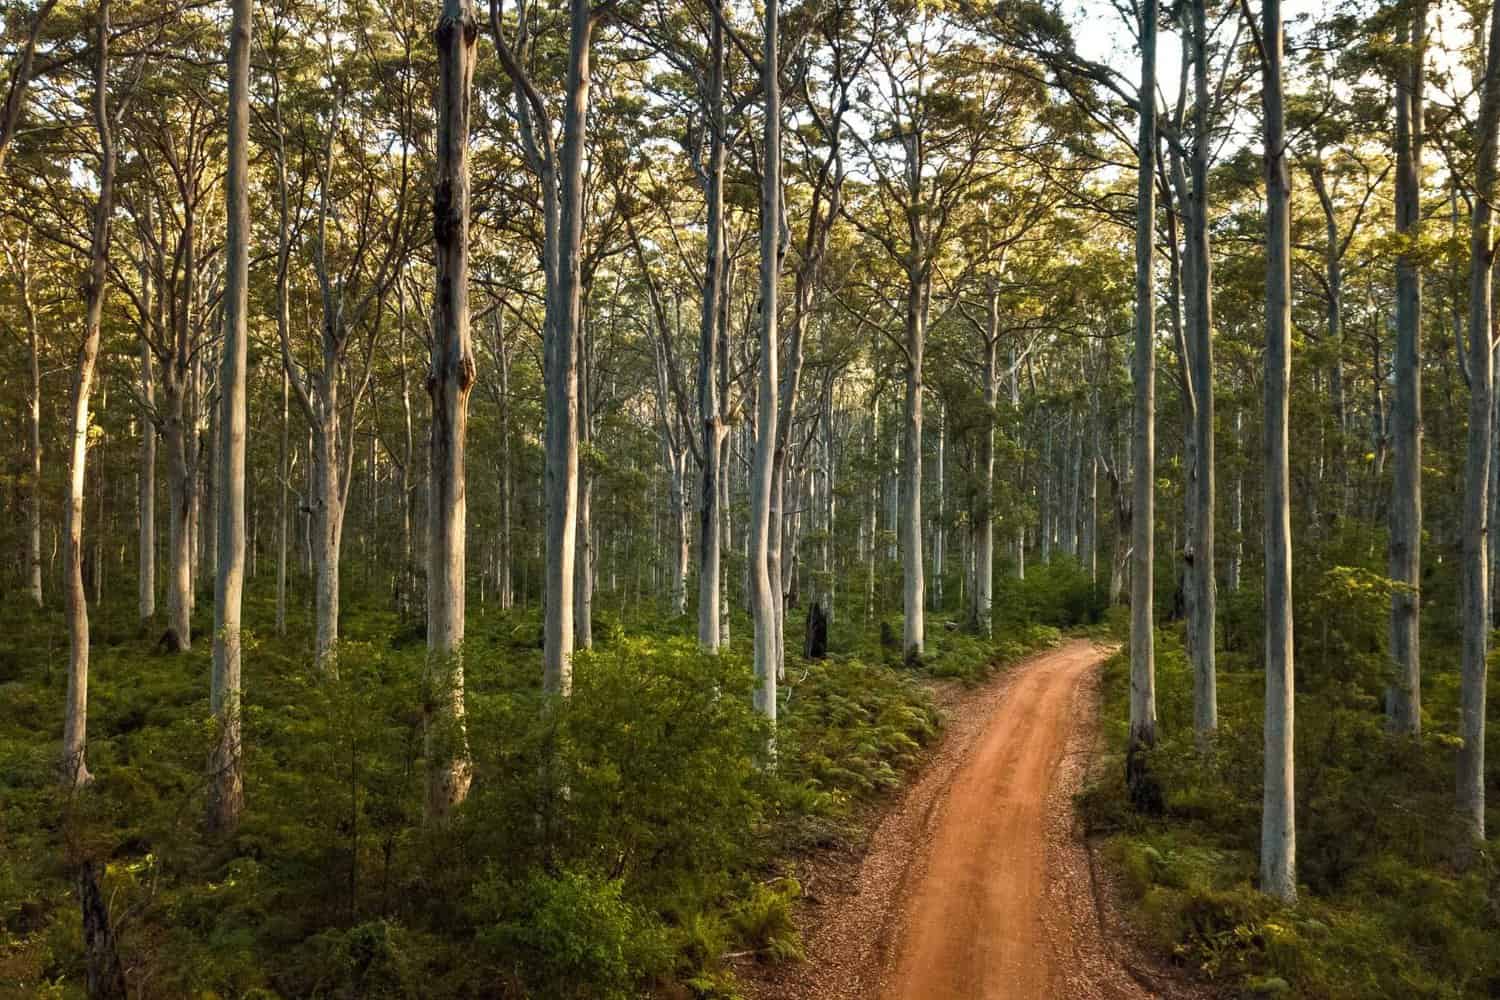 Dirt track winding through the serene, sunlit Boranup Forest, with its tall, slender trees and lush understory.